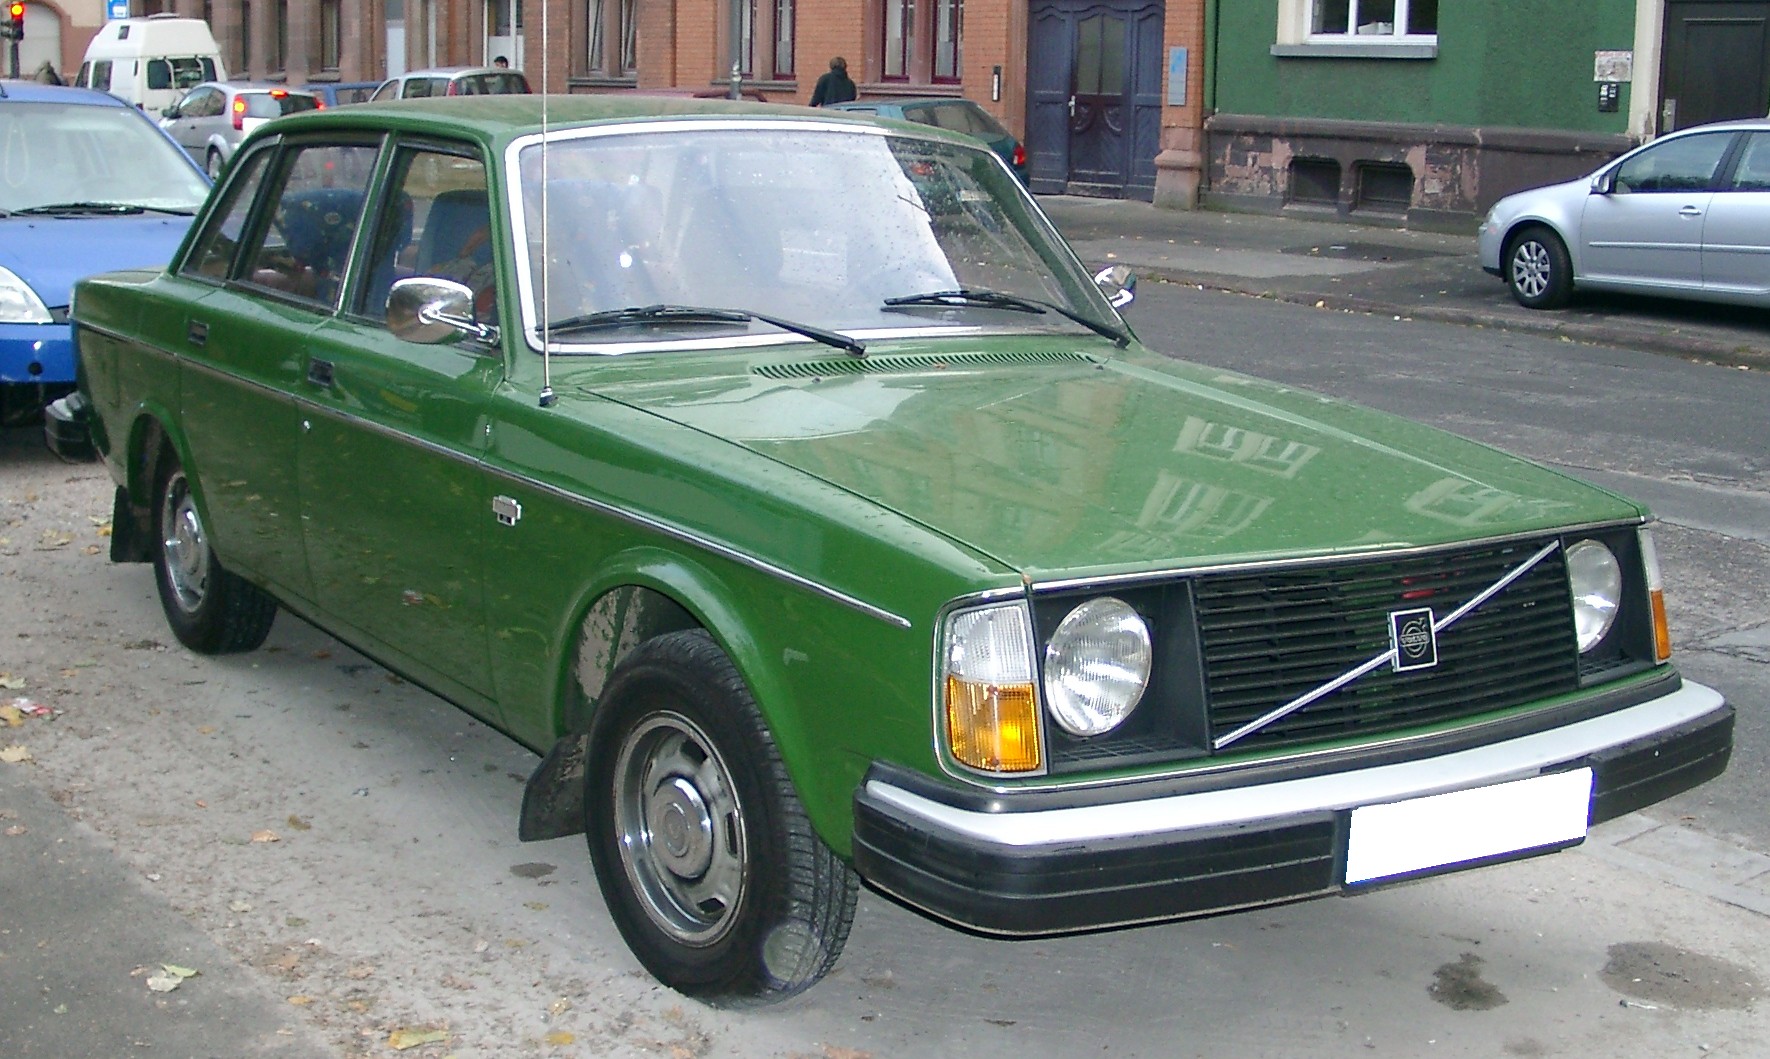 File:Volvo 244DL front 20071017.jpg - Wikimedia Commons